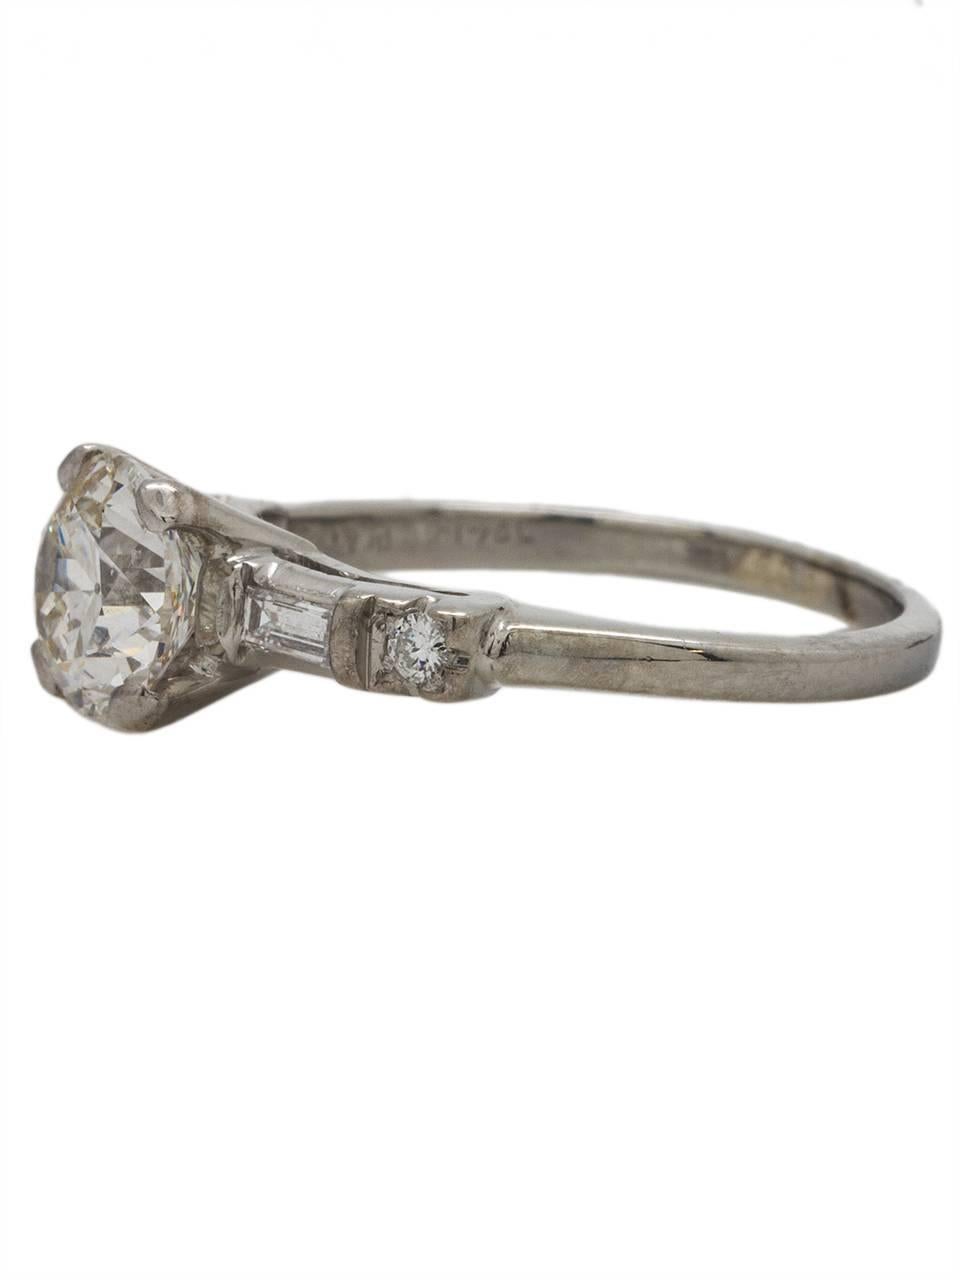 This classic 1950's 14K white gold engagement ring is set with a stunningly bright EGL certified 1.23ct Transitional Cut round diamond, G-SI2. The center stone is flanked by two bar set straight baguettes and two bead set full cut round side